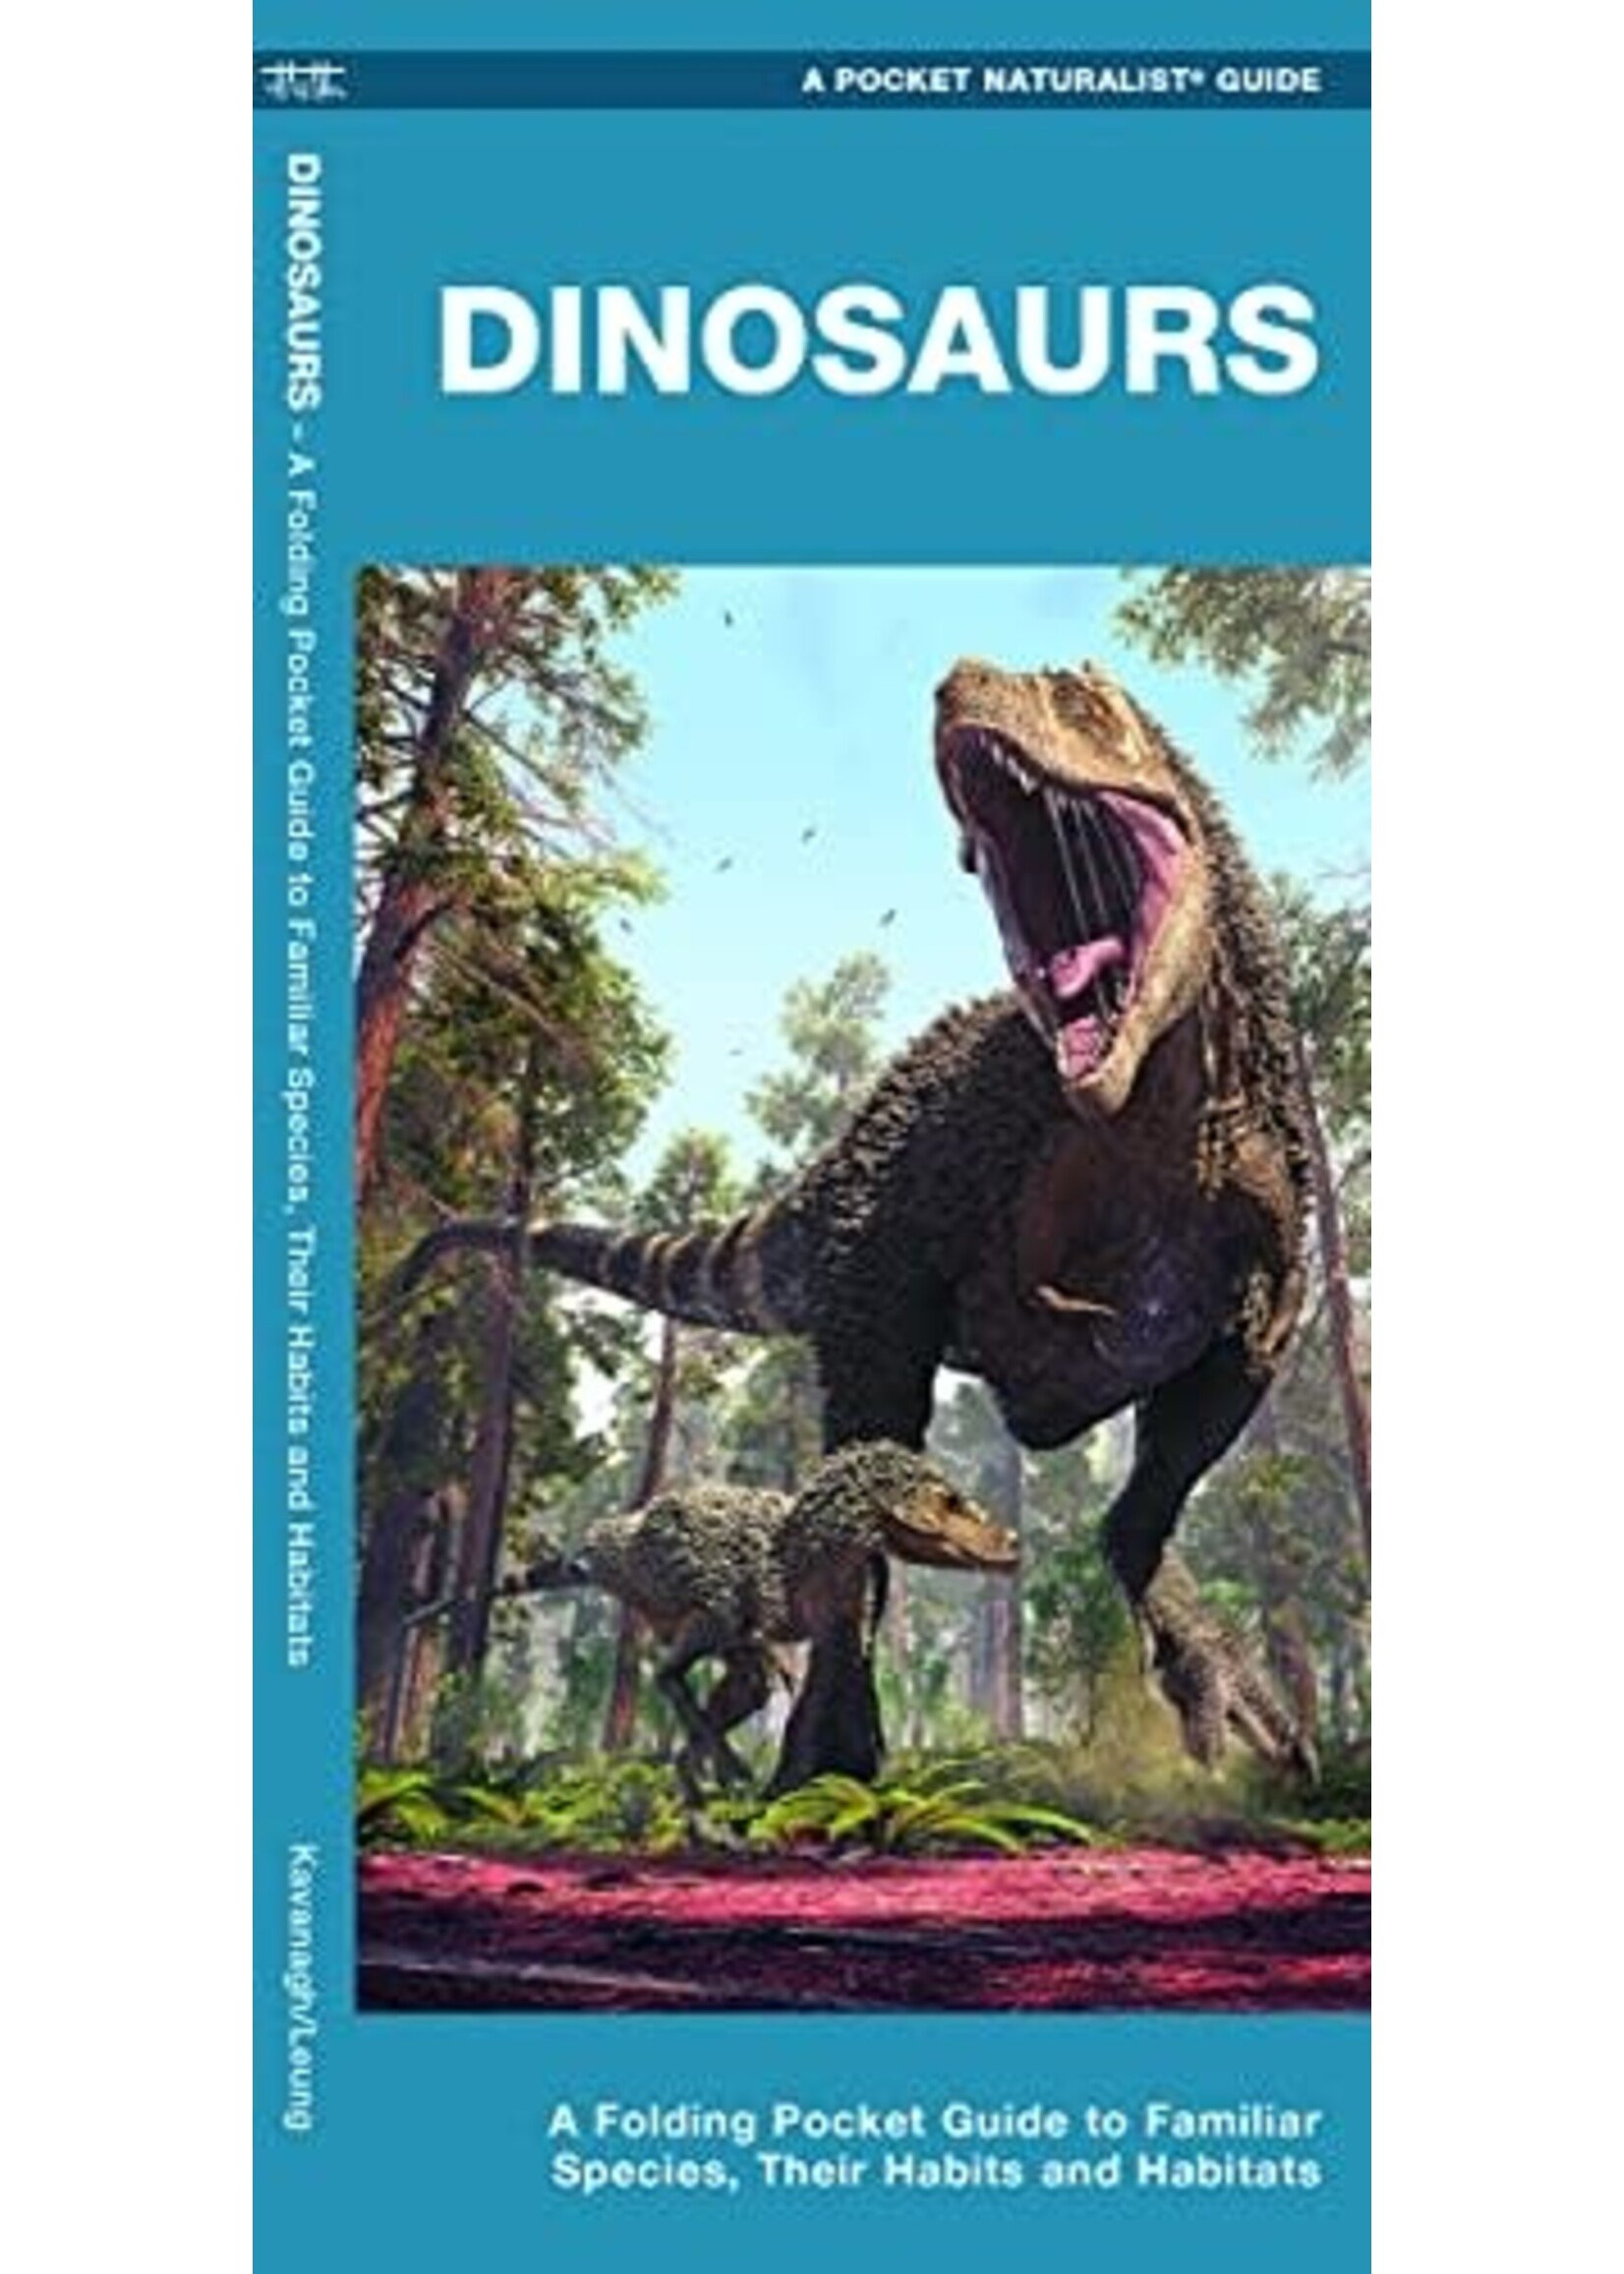 Dinosaurs: A Folding Pocket Guide to Familiar Species, Their Habits and Habitats